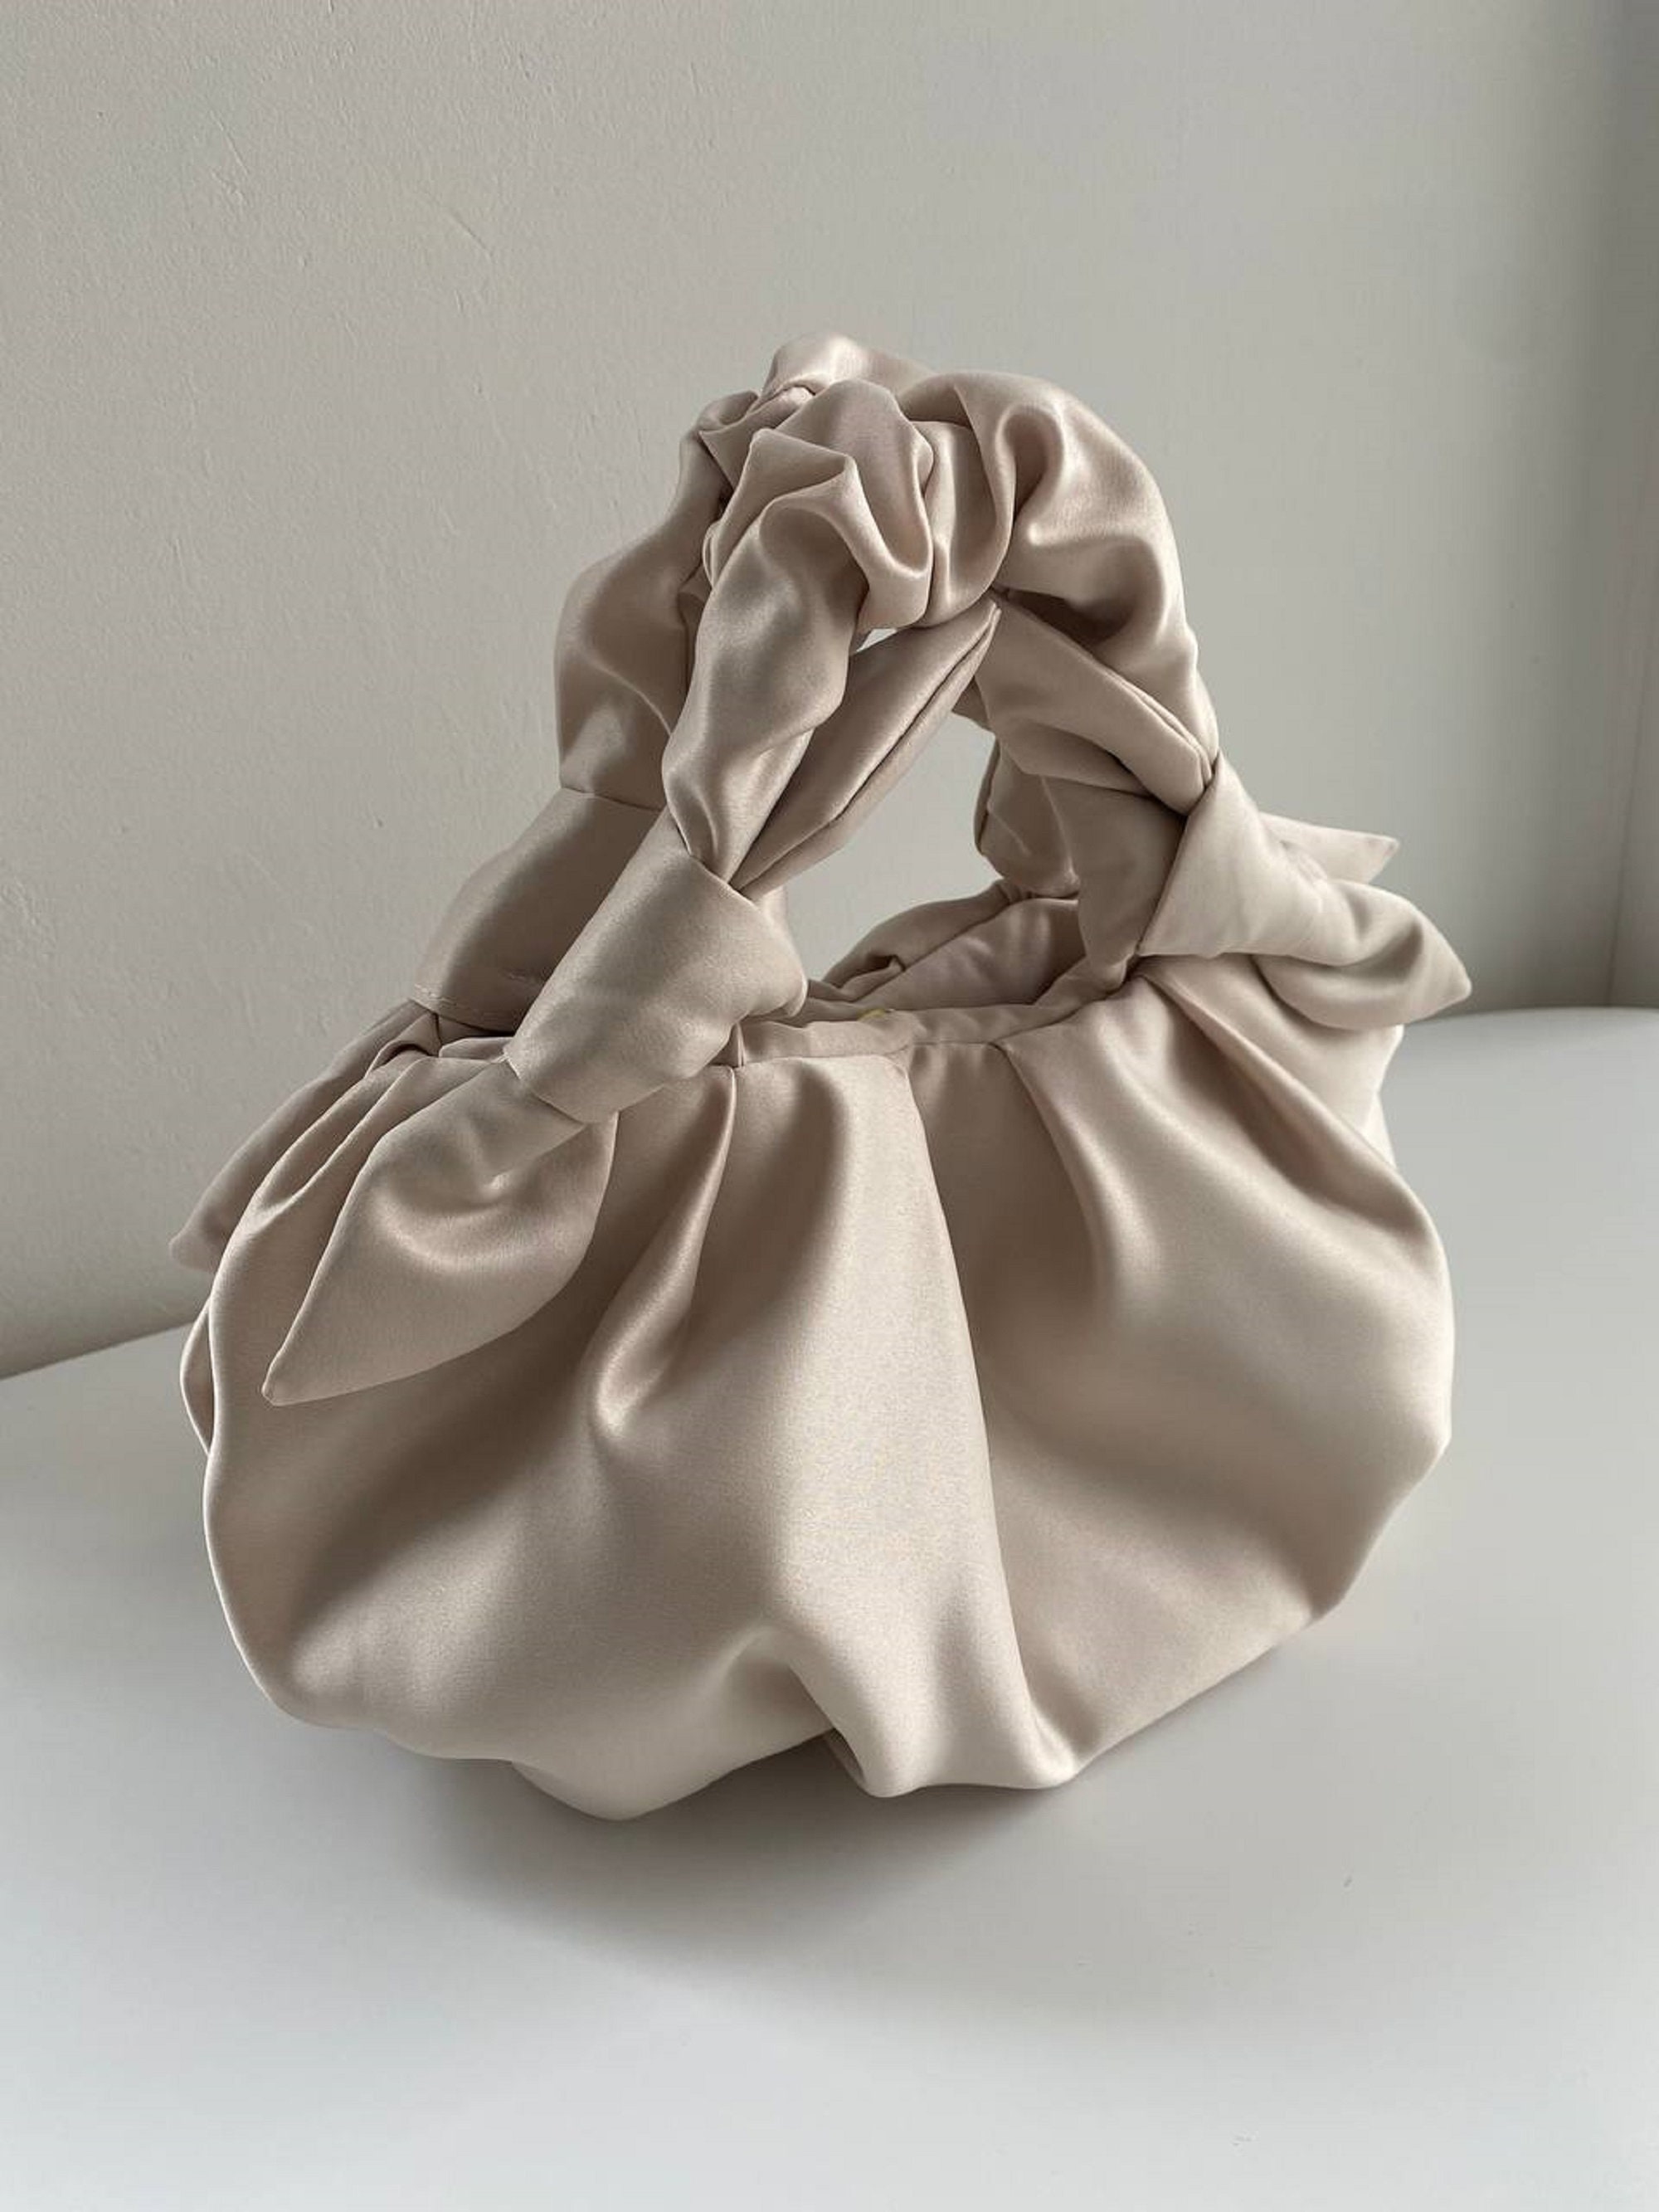 Satin Knot Bag Small Ivory Bag 25 Colors Gift for Her - Etsy